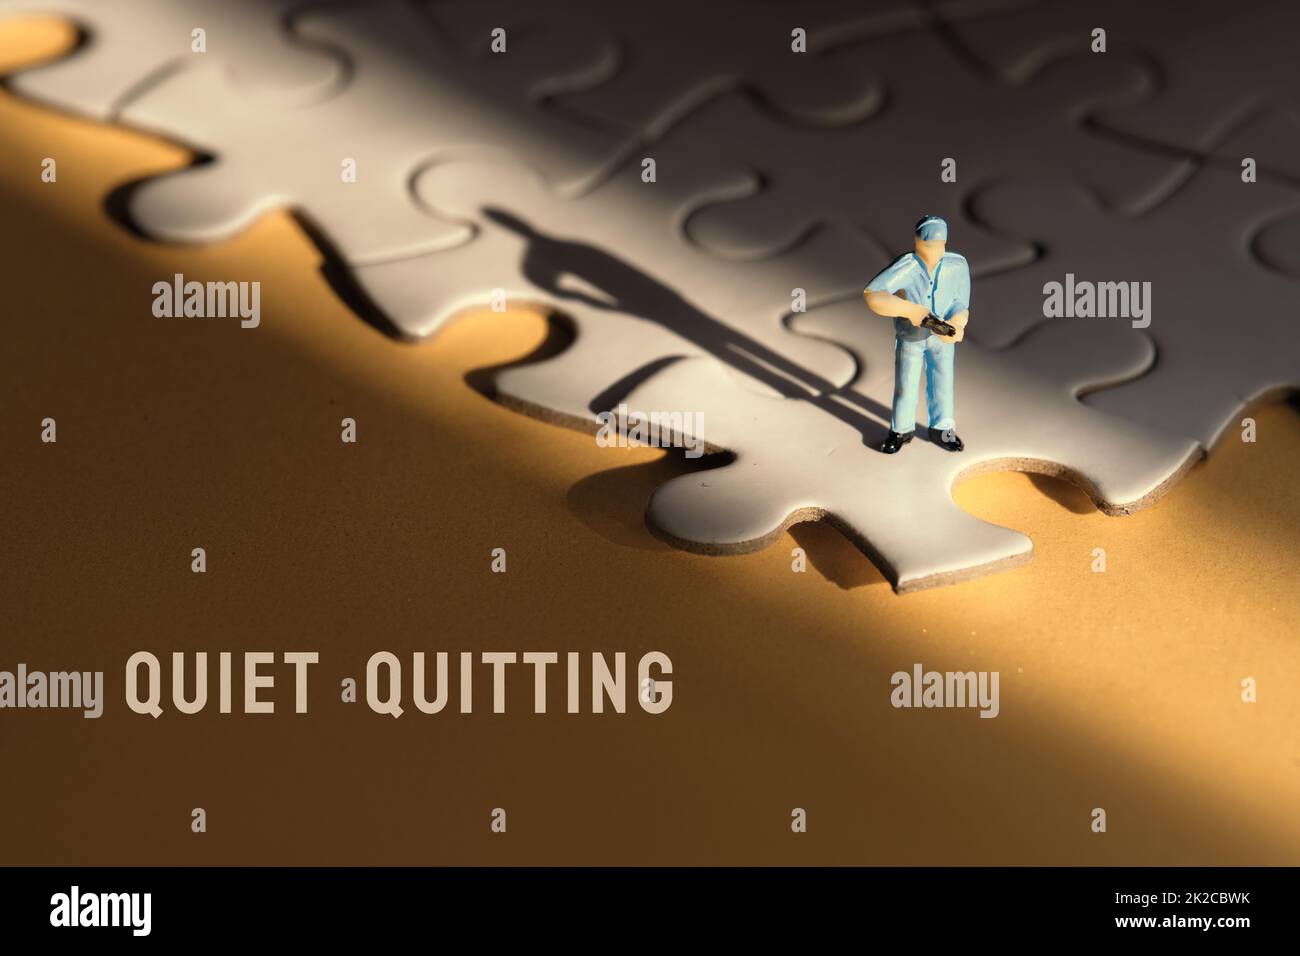 Concept of quiet quitting, job burnout, depression. Single tiny worker miniature figure on edge of linked blue jigsaw puzzle. Yellow paper background Stock Photo